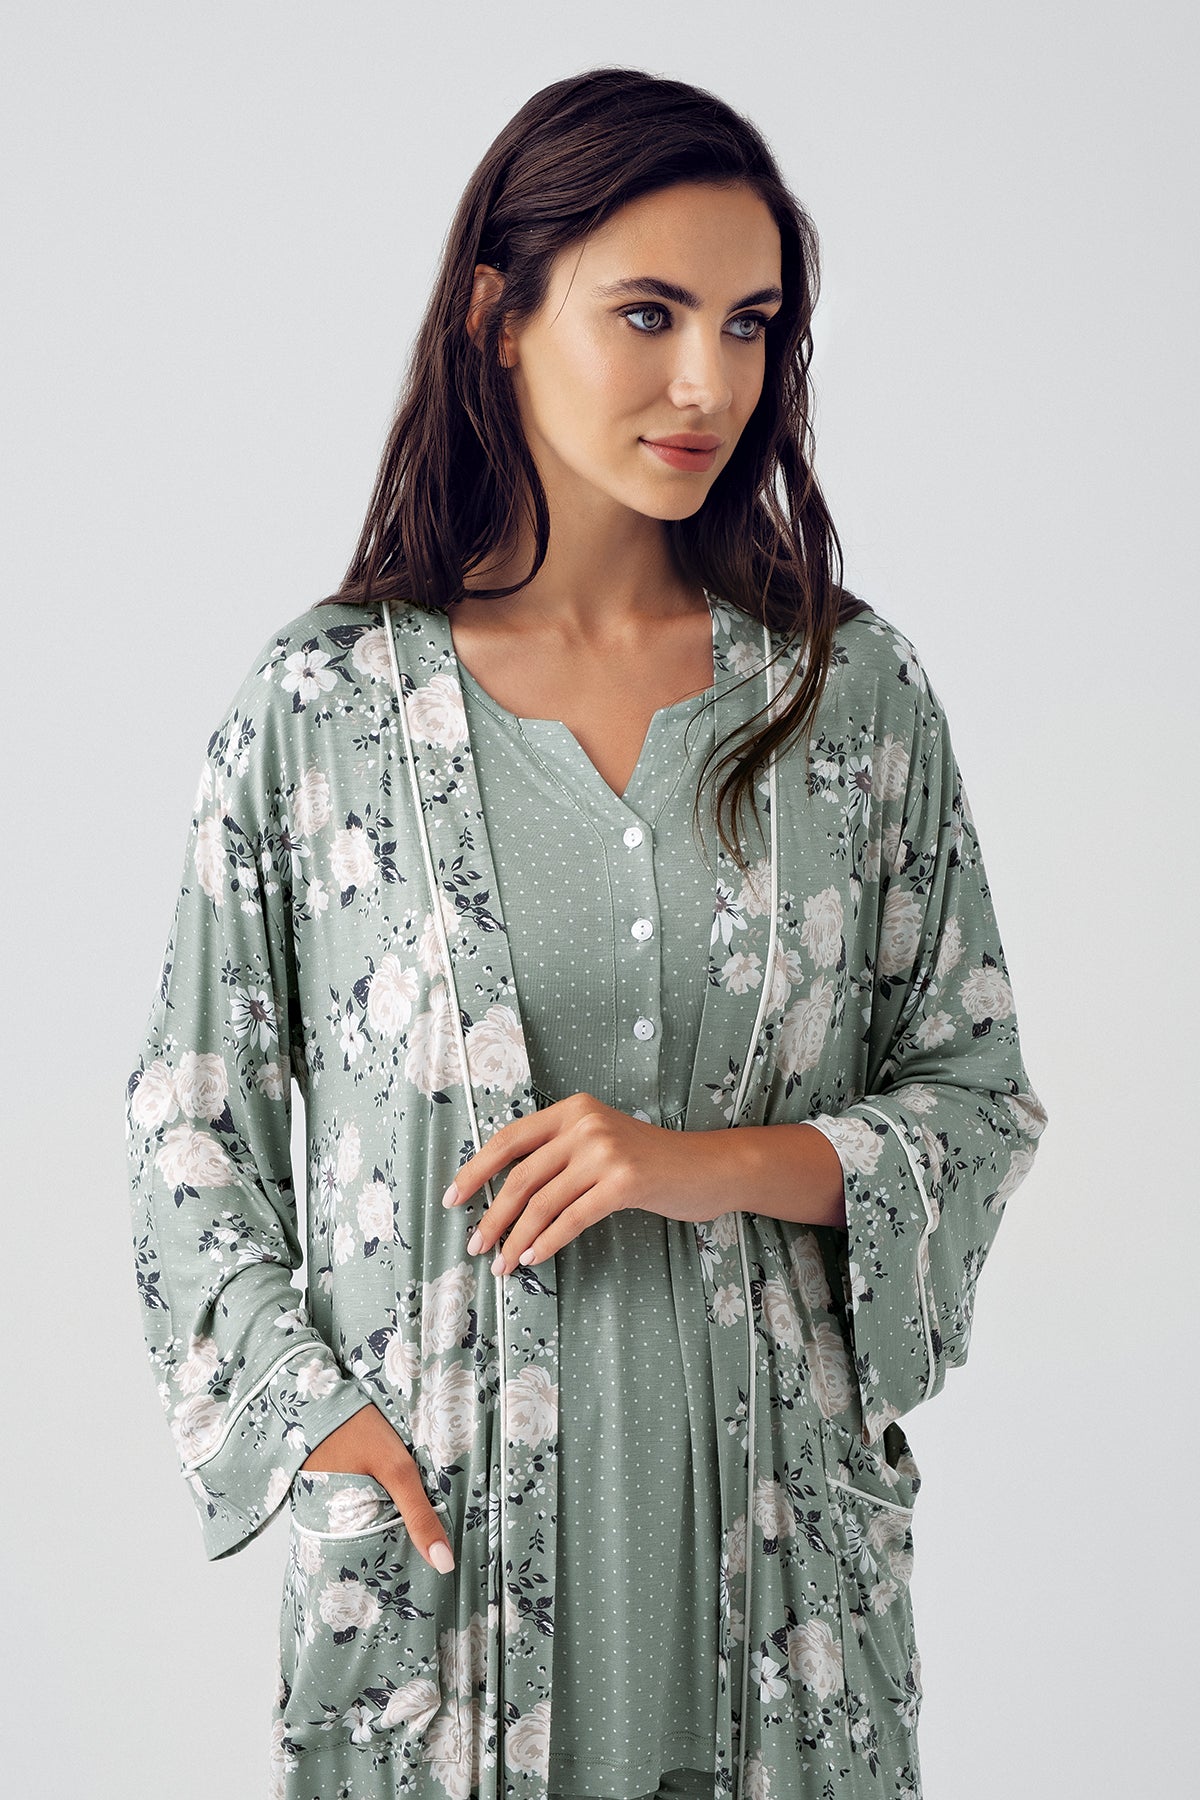 Shopymommy 15304 Polka Dot 3-Pieces Maternity & Nursing Pajamas With Flower Patterned Robe Green